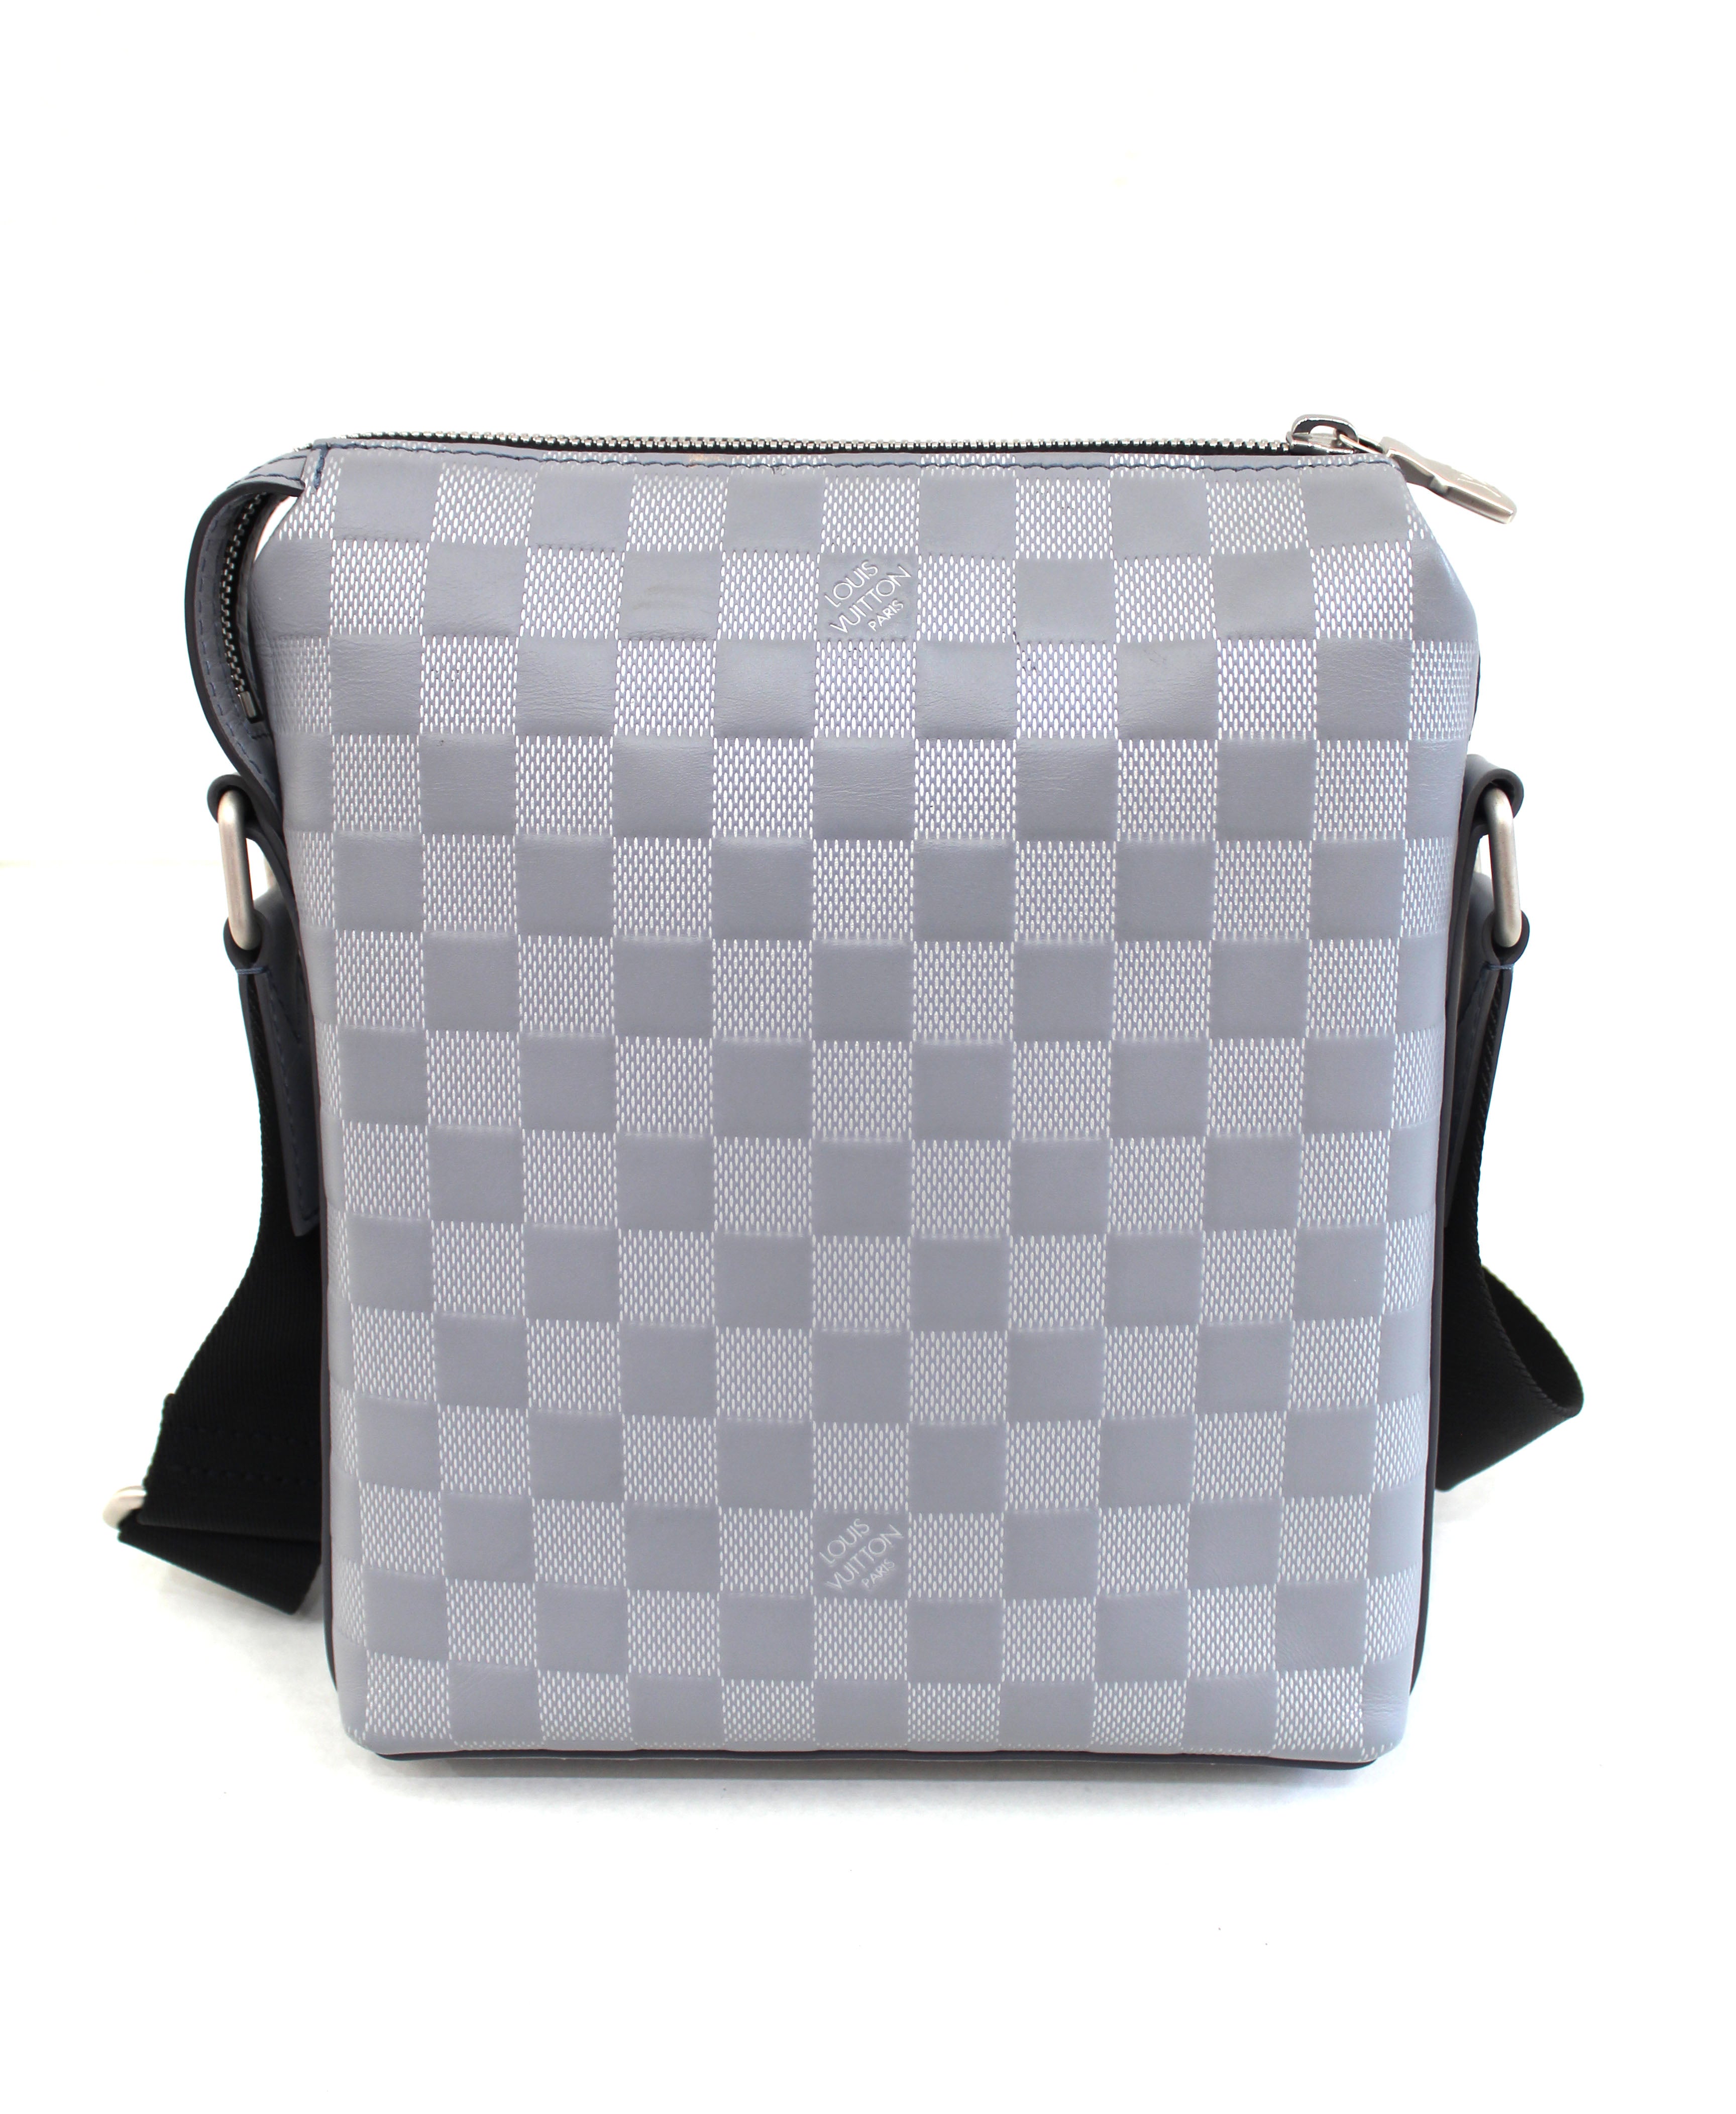 Authentic Louis Vuitton Grey Damier Infini Leather Discovery BB Messenger Crossbody Bag